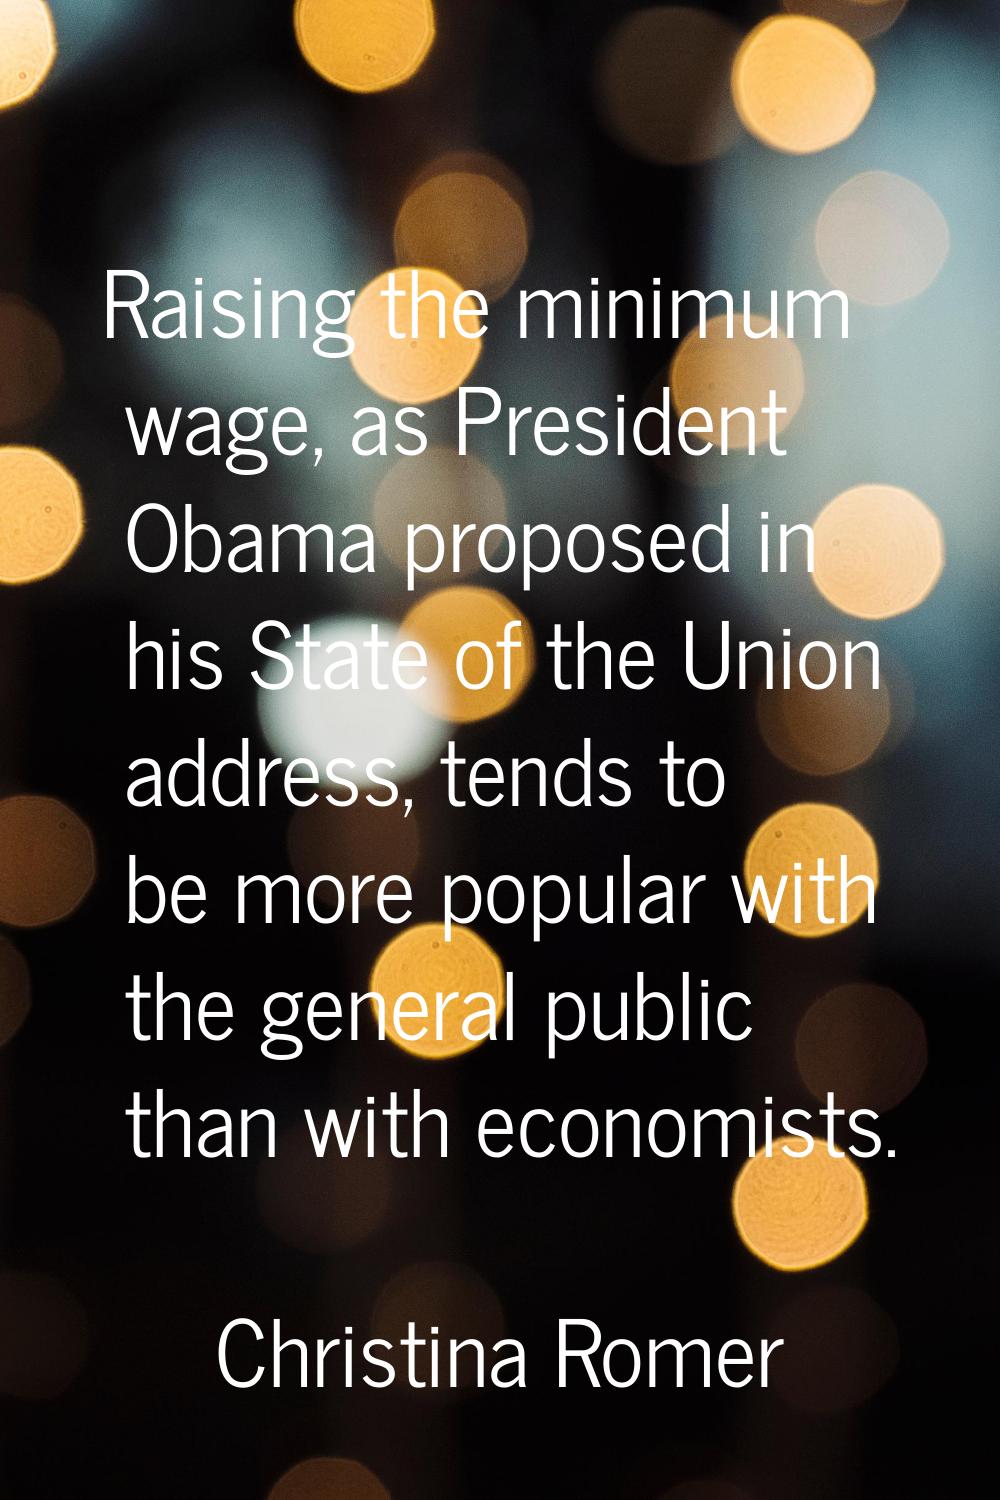 Raising the minimum wage, as President Obama proposed in his State of the Union address, tends to b